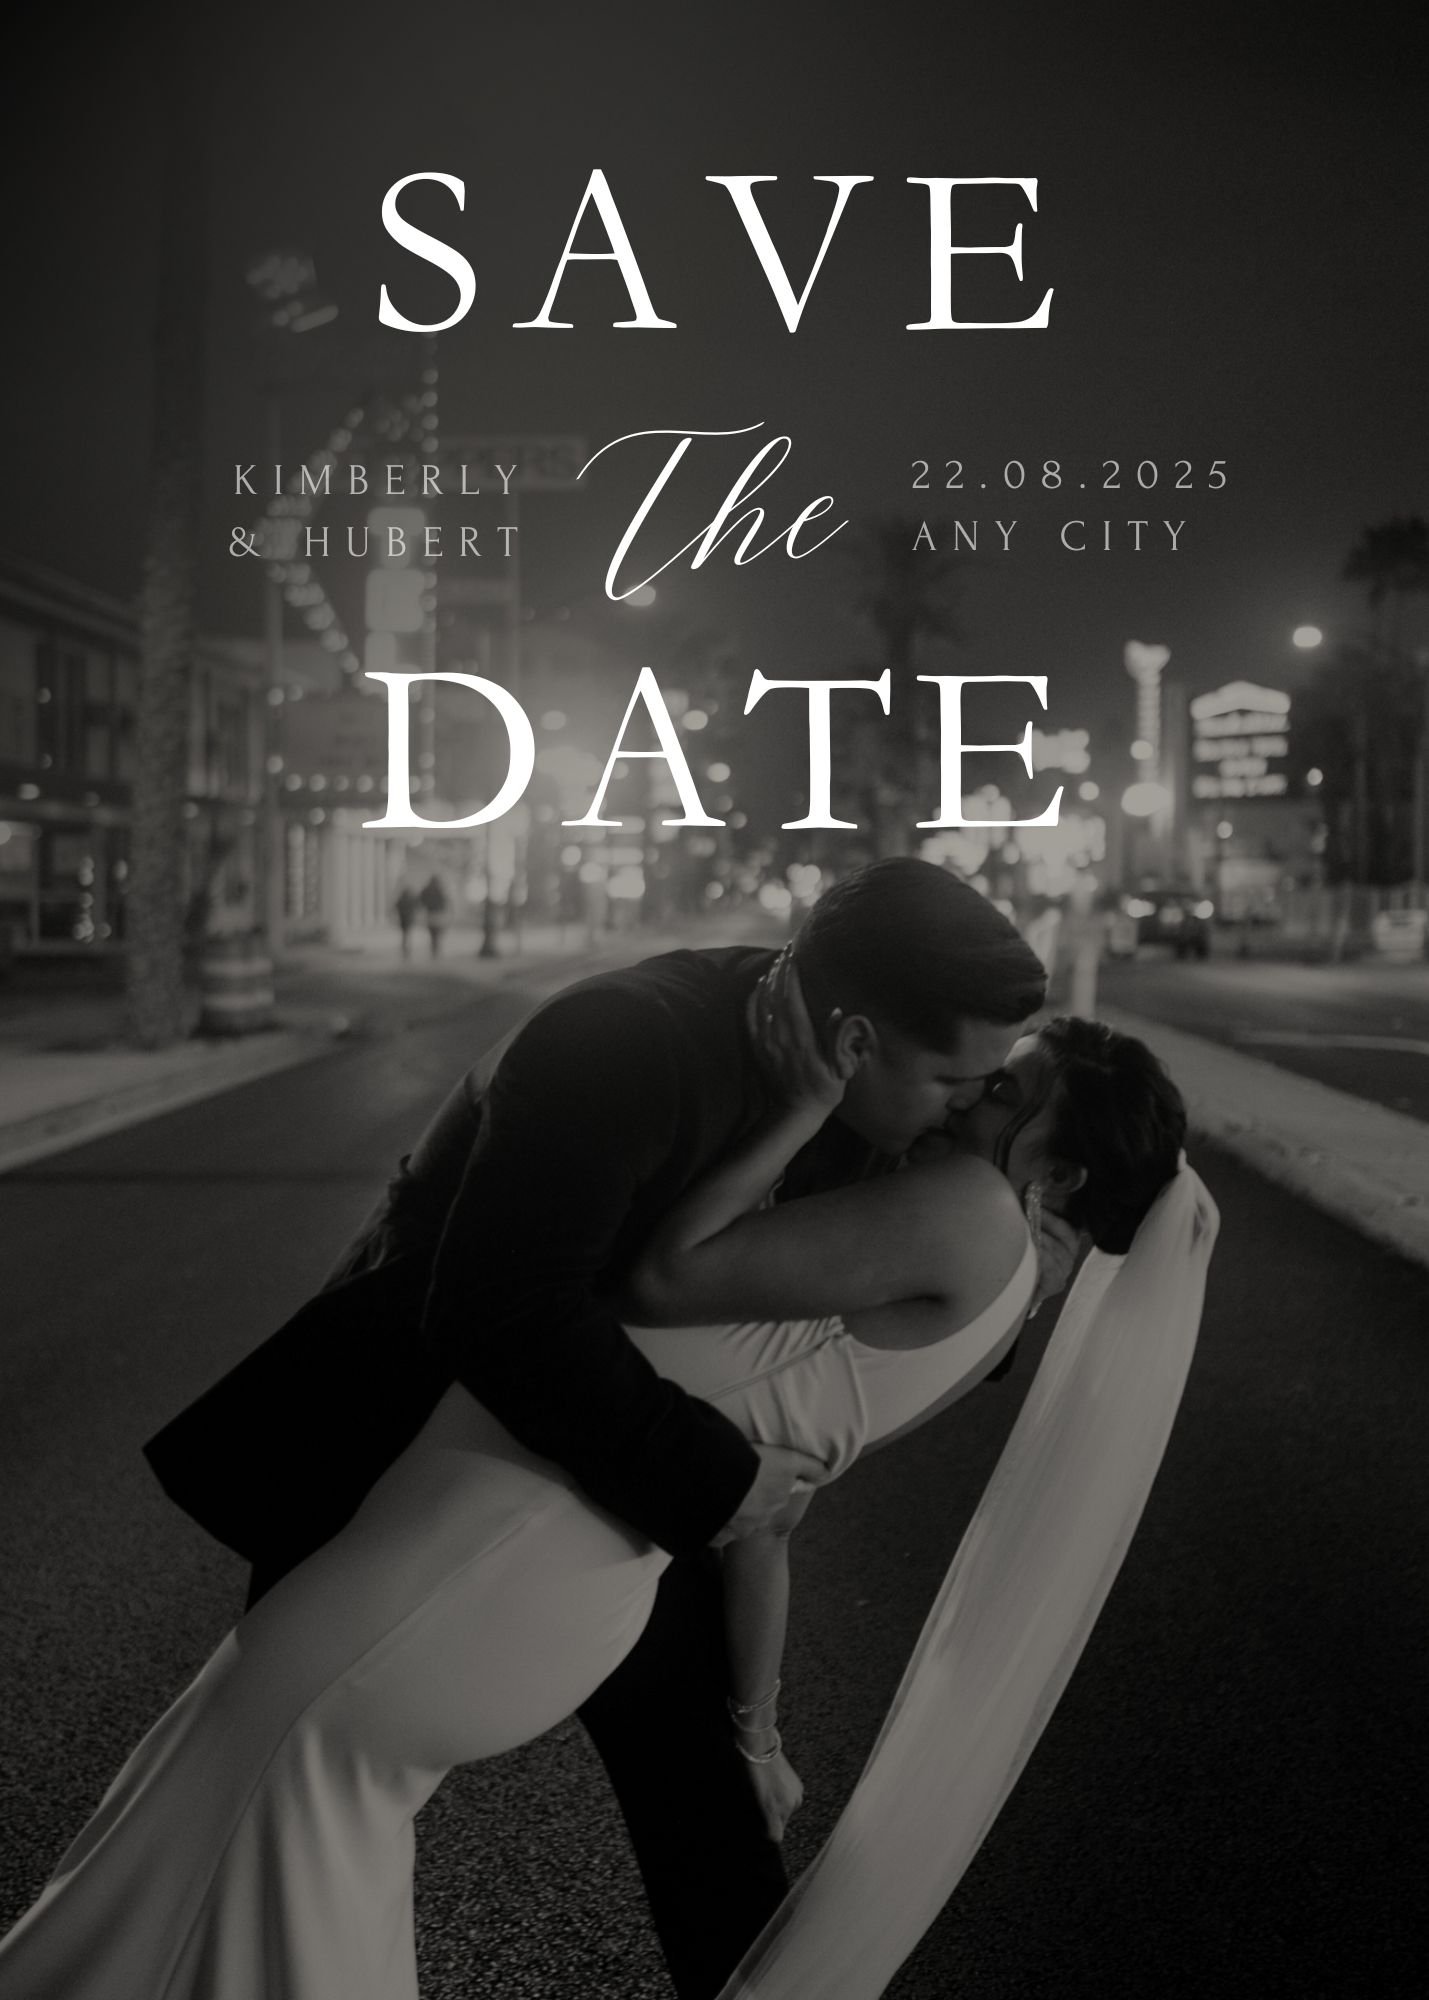 Photo typography stylish black and white save the date wedding party invitation.jpg